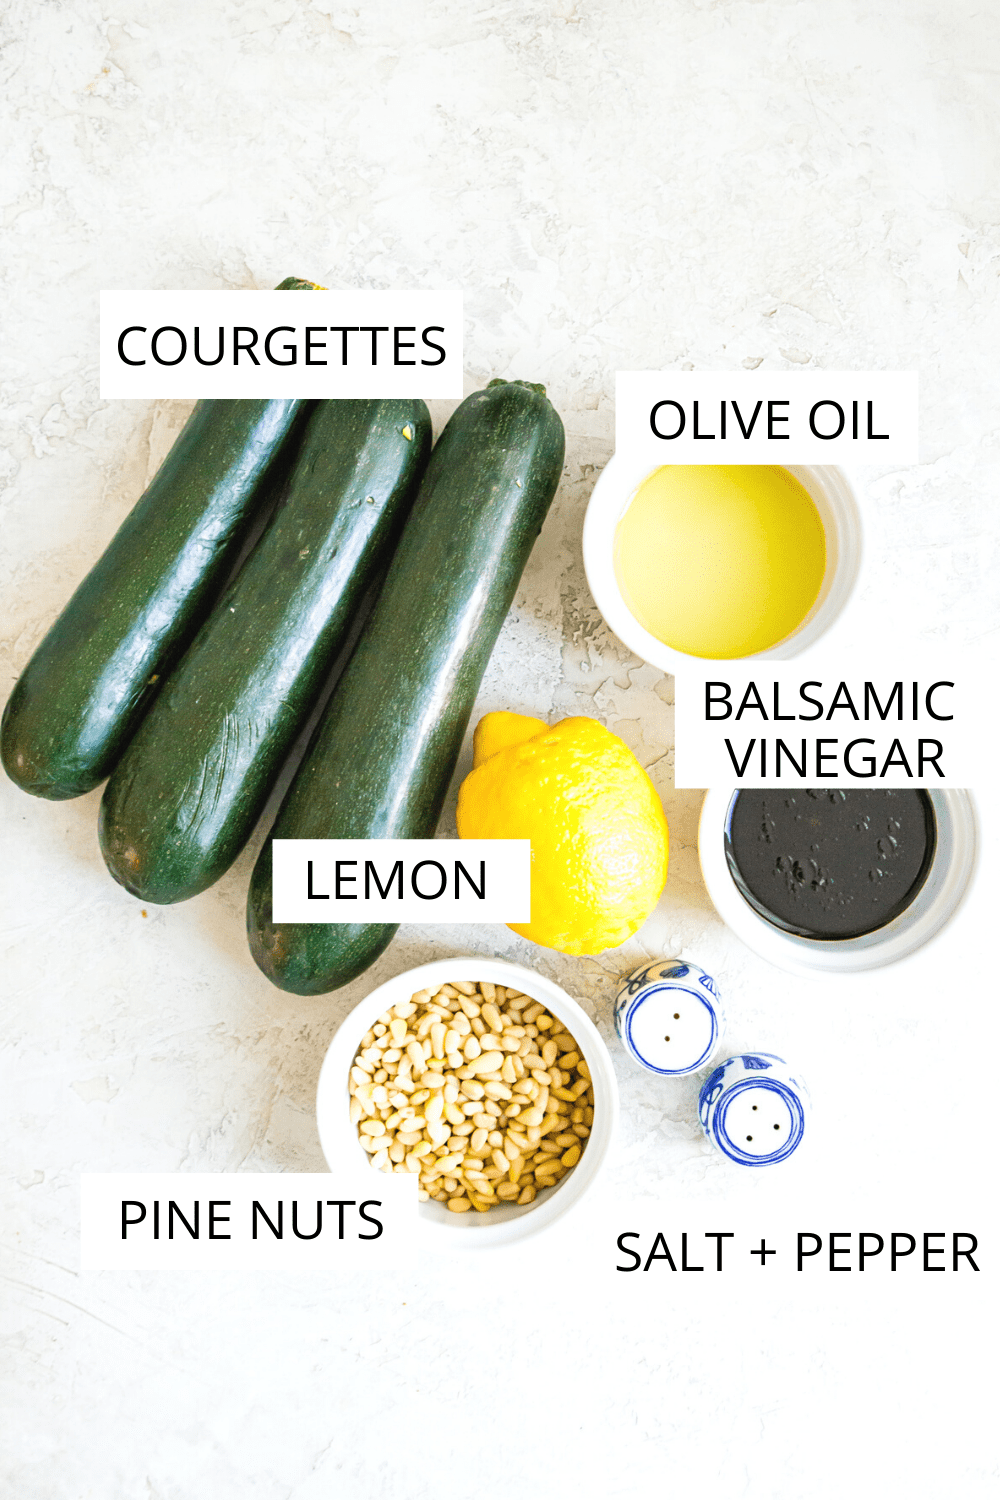 Ingredients for making a courgette salad